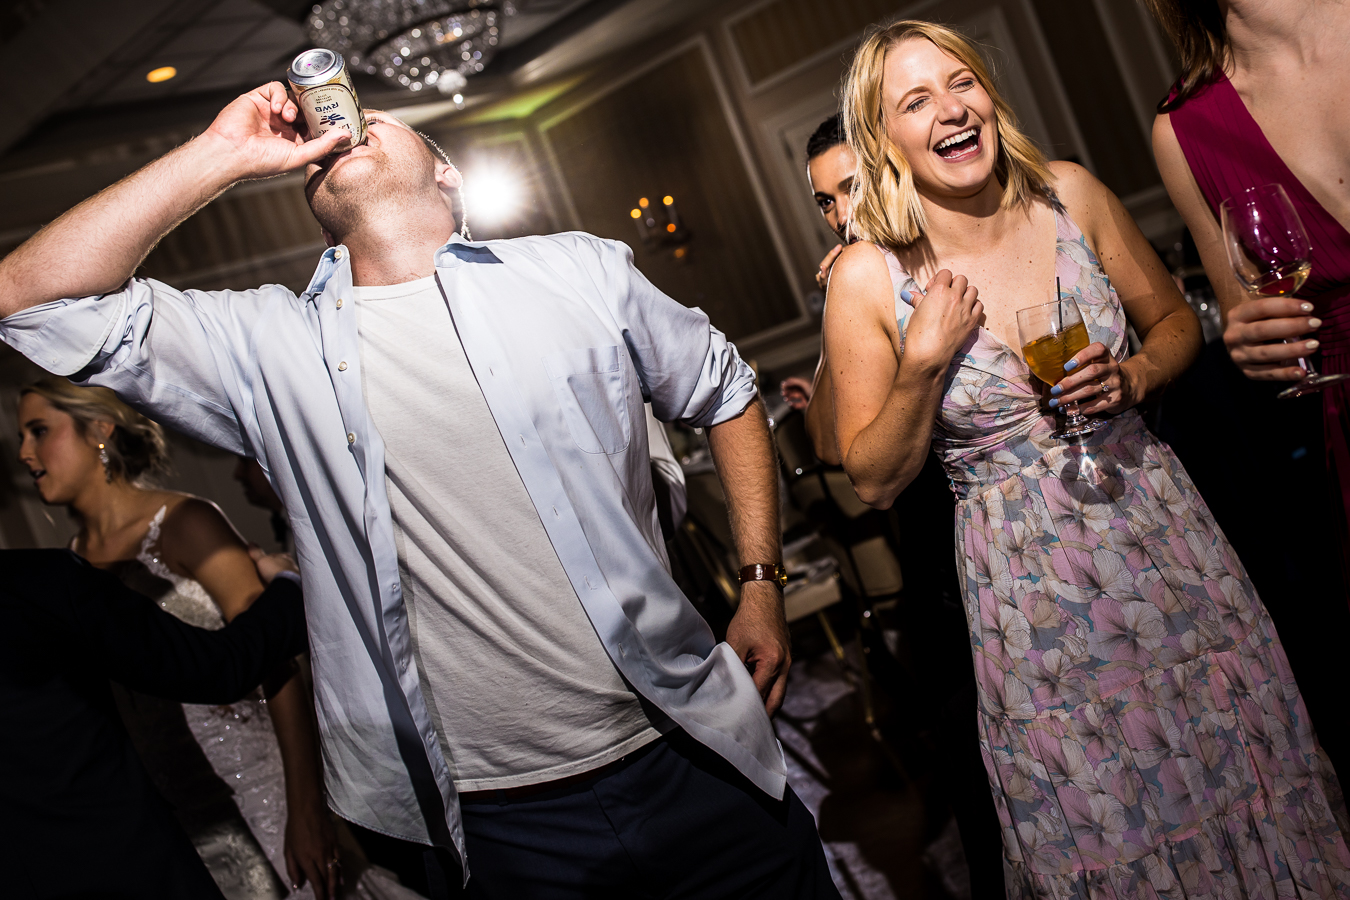 best pa wedding photographer, rhinehart photography, captures this image of a guest drinking his beer while another girl guest stands beside him laughing and smiling with a drink in her hand